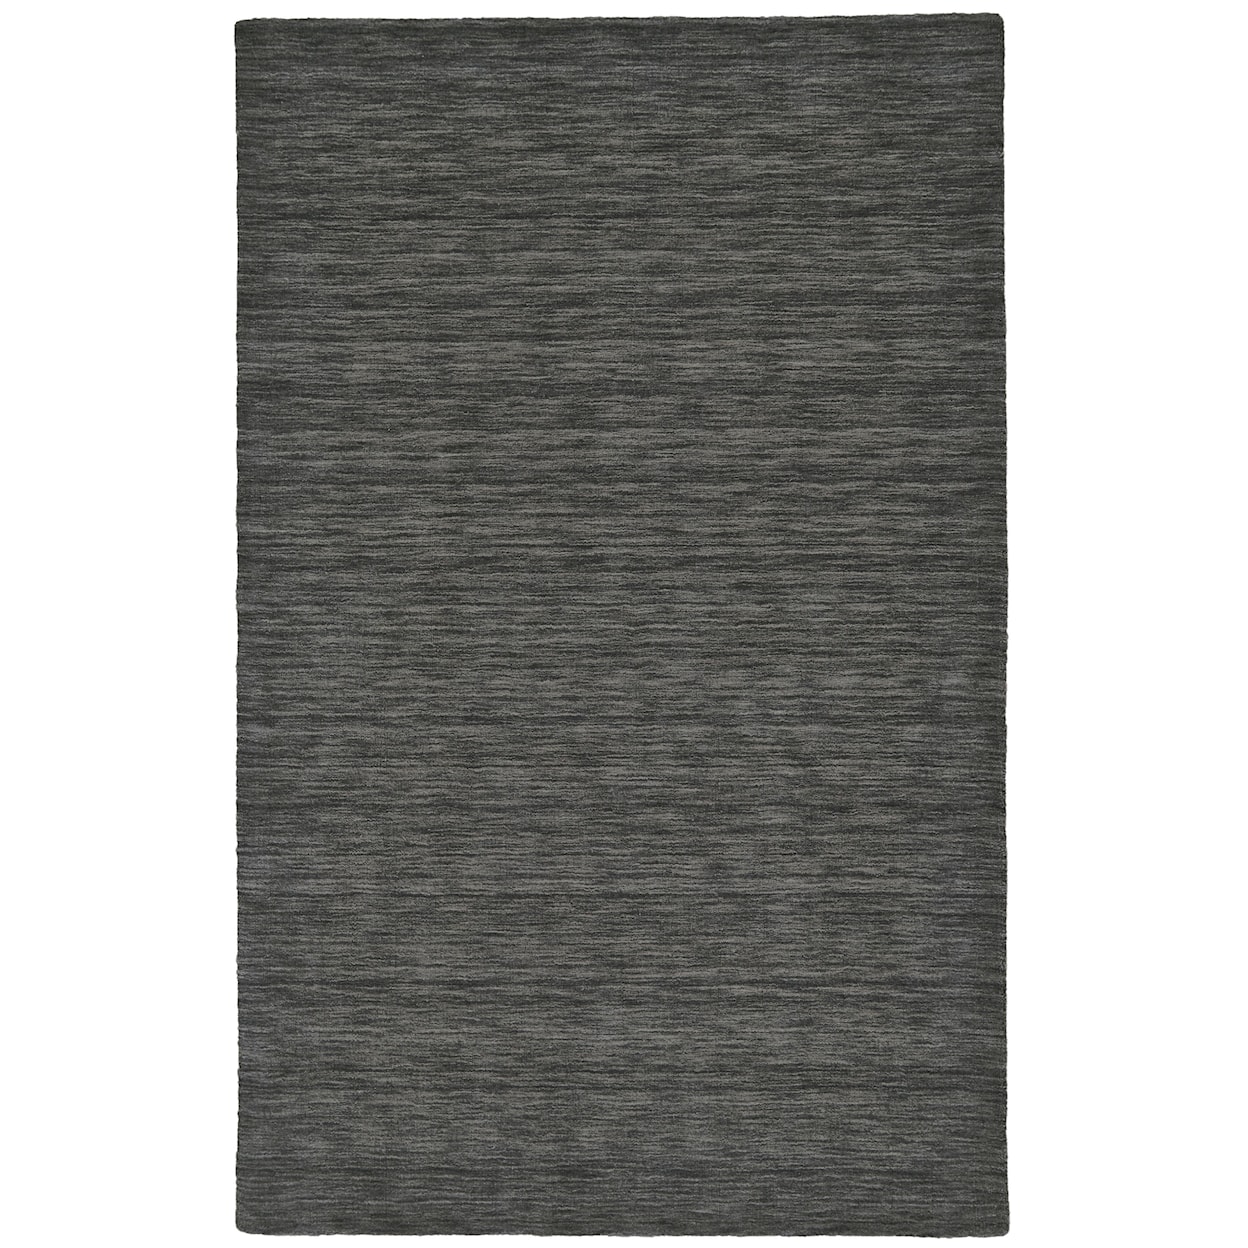 Feizy Rugs Luna Charcoal 2'-6" x 8' Runner Rug